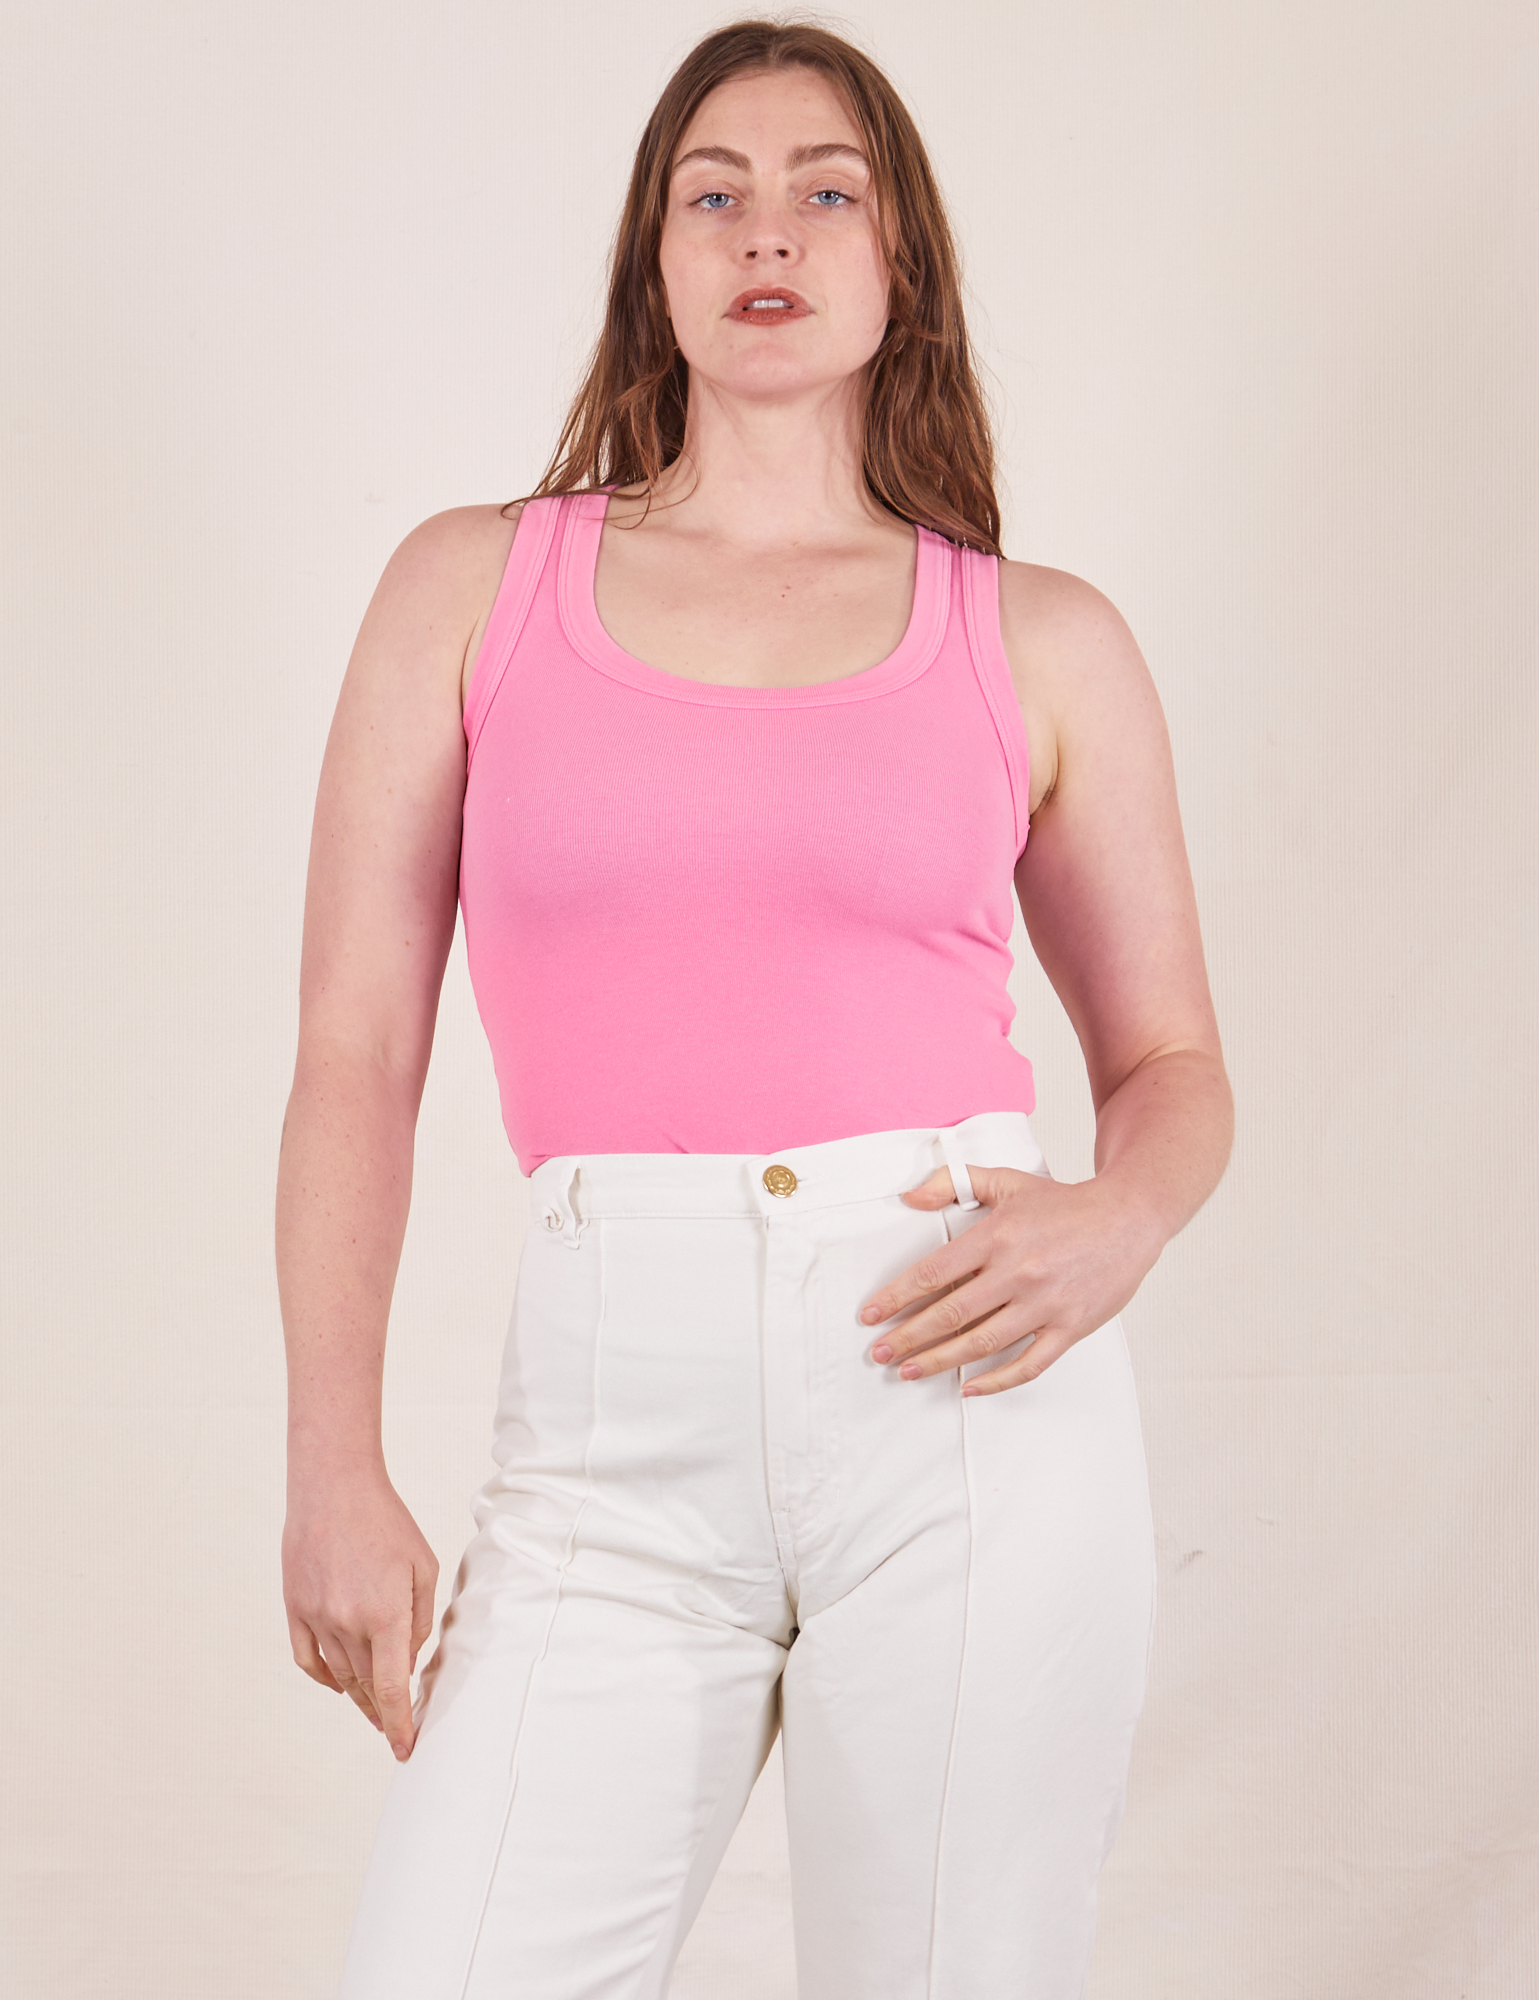 Allison is wearing size XXS Tank Top in Bubblegum Pink paired with vintage tee off-white Western Pants